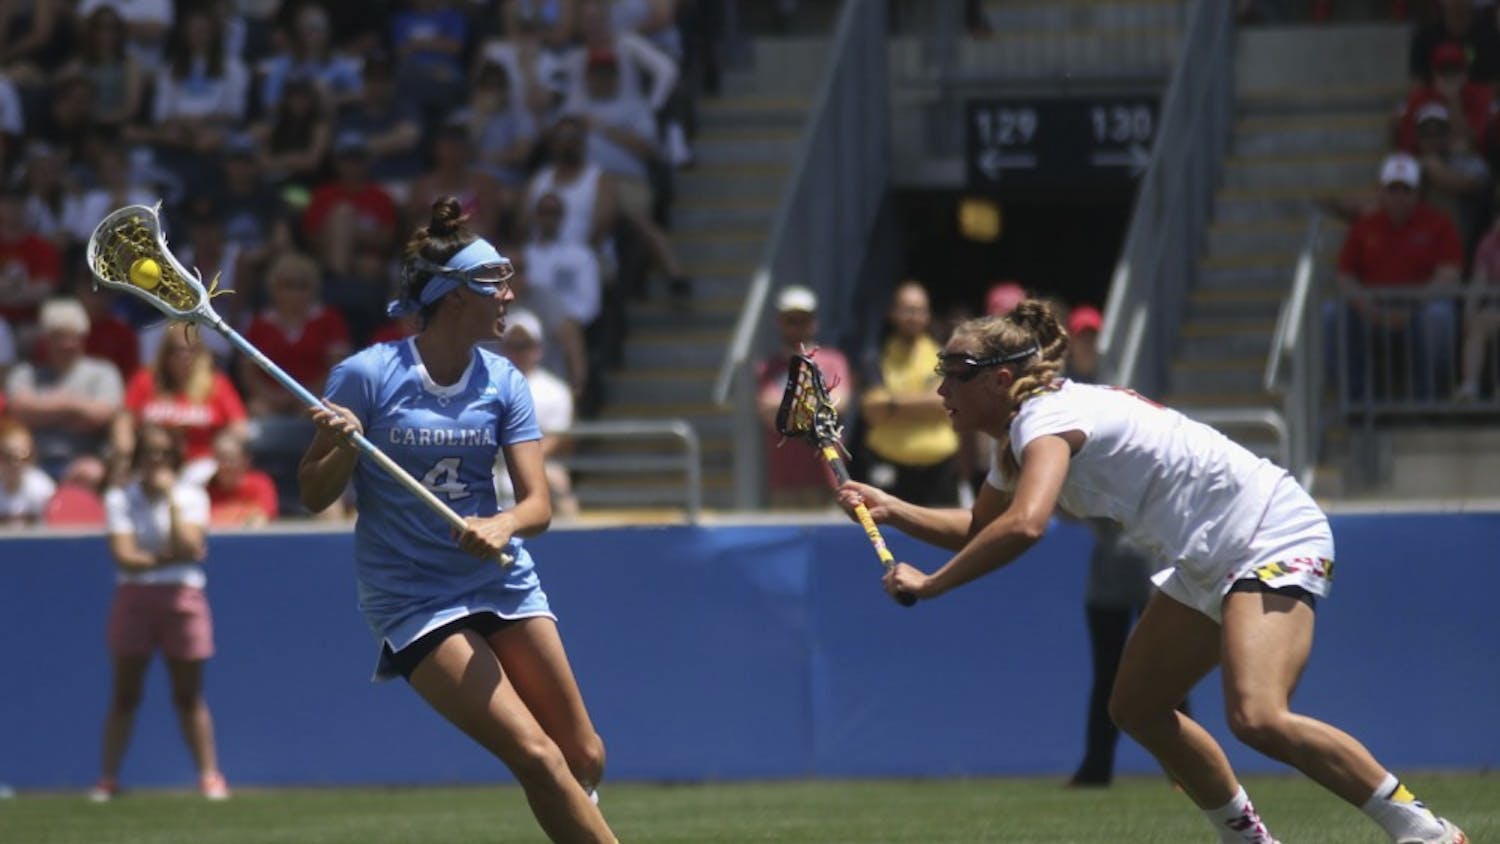 UNC midfielder Marie McCool looks for an open teammate to pass to. The North Carolina women's lacrosse team defeated Maryland 13-7 to capture the NCAA championship on May 29, 2016&nbsp;at Talen Energy Stadium in Chester, PA.